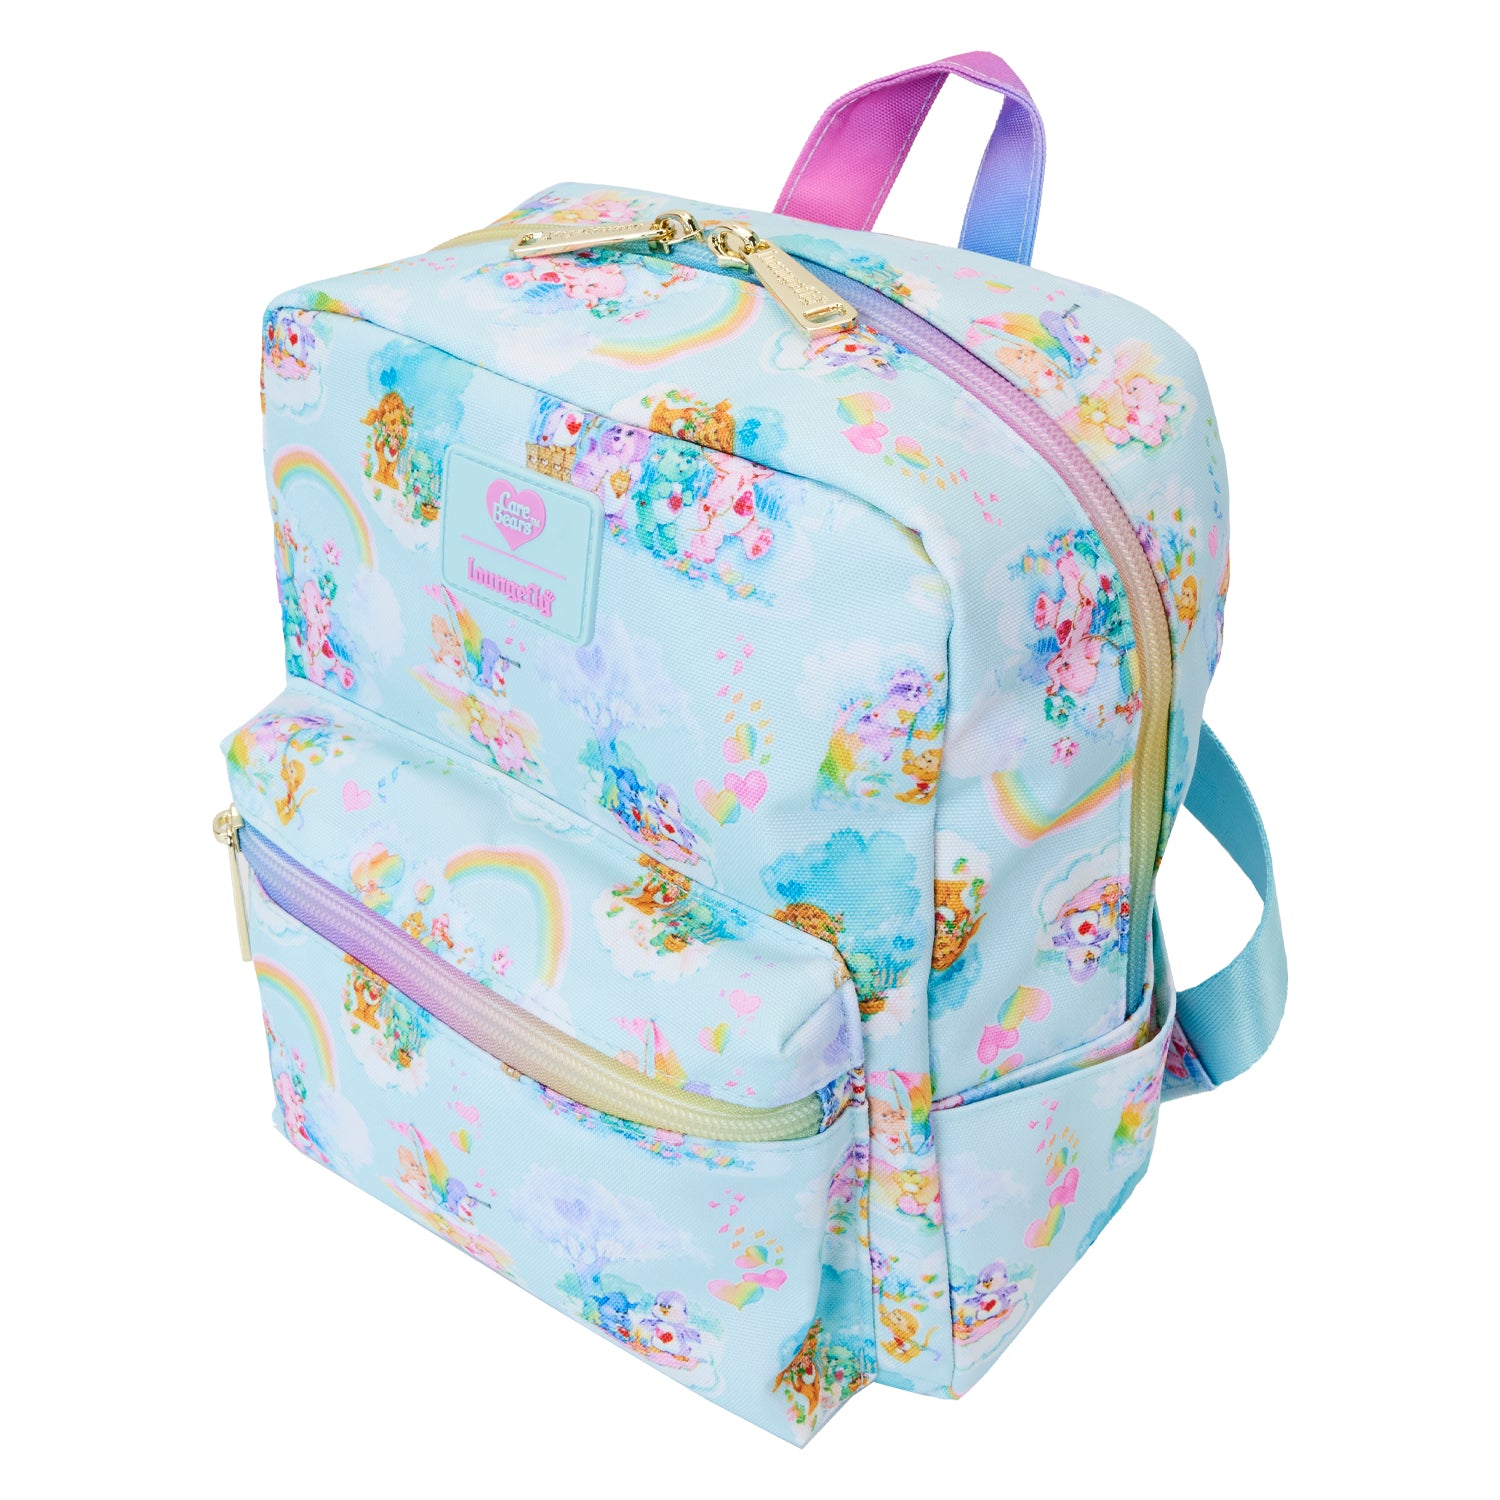 Loungefly x Care Bears Cousins AOP Nylon Small Square Mini Backpack